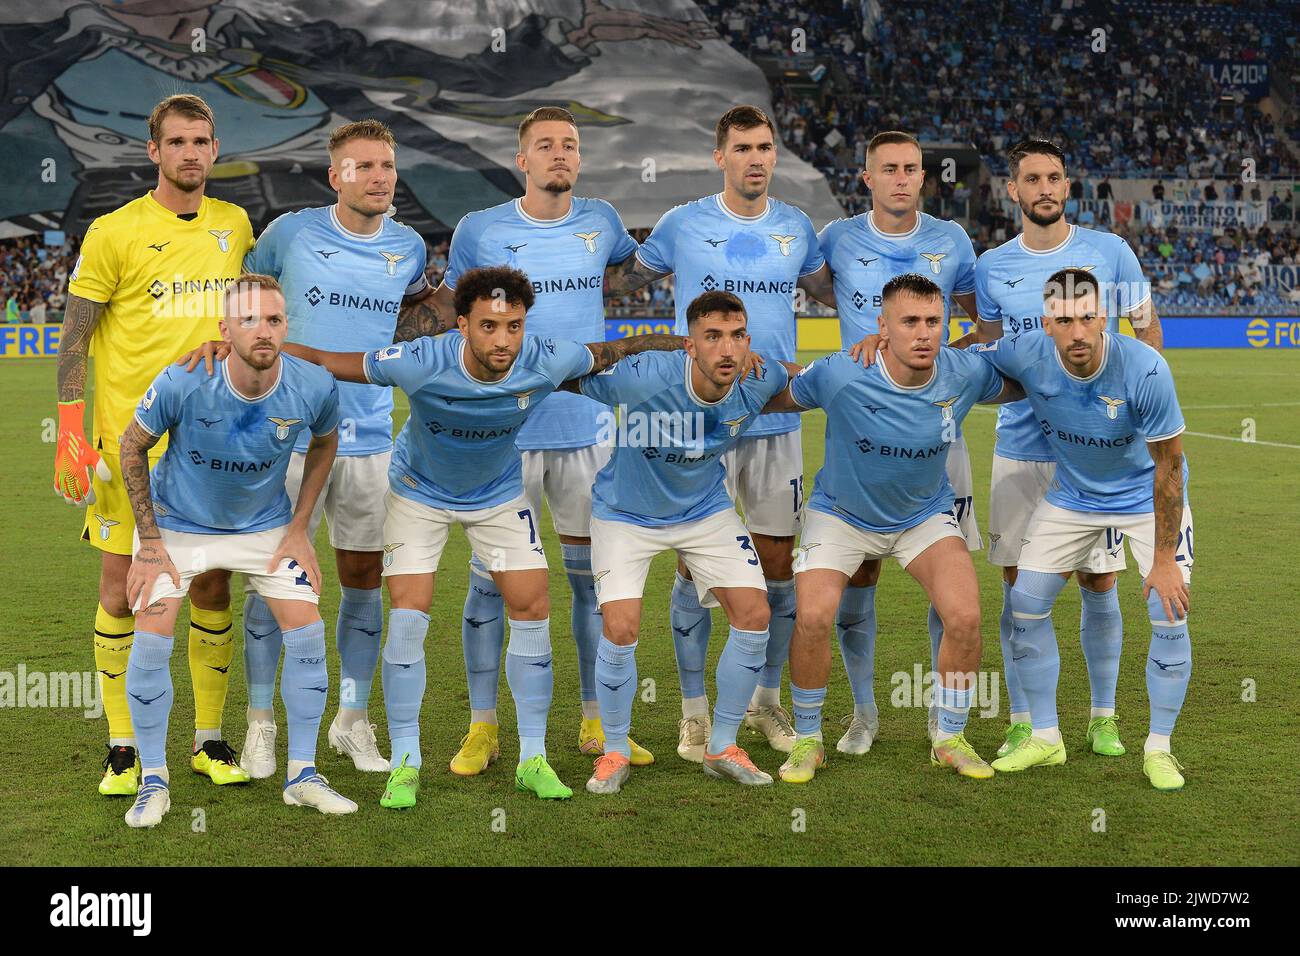 Ss lazio team hi-res stock photography and images - Alamy